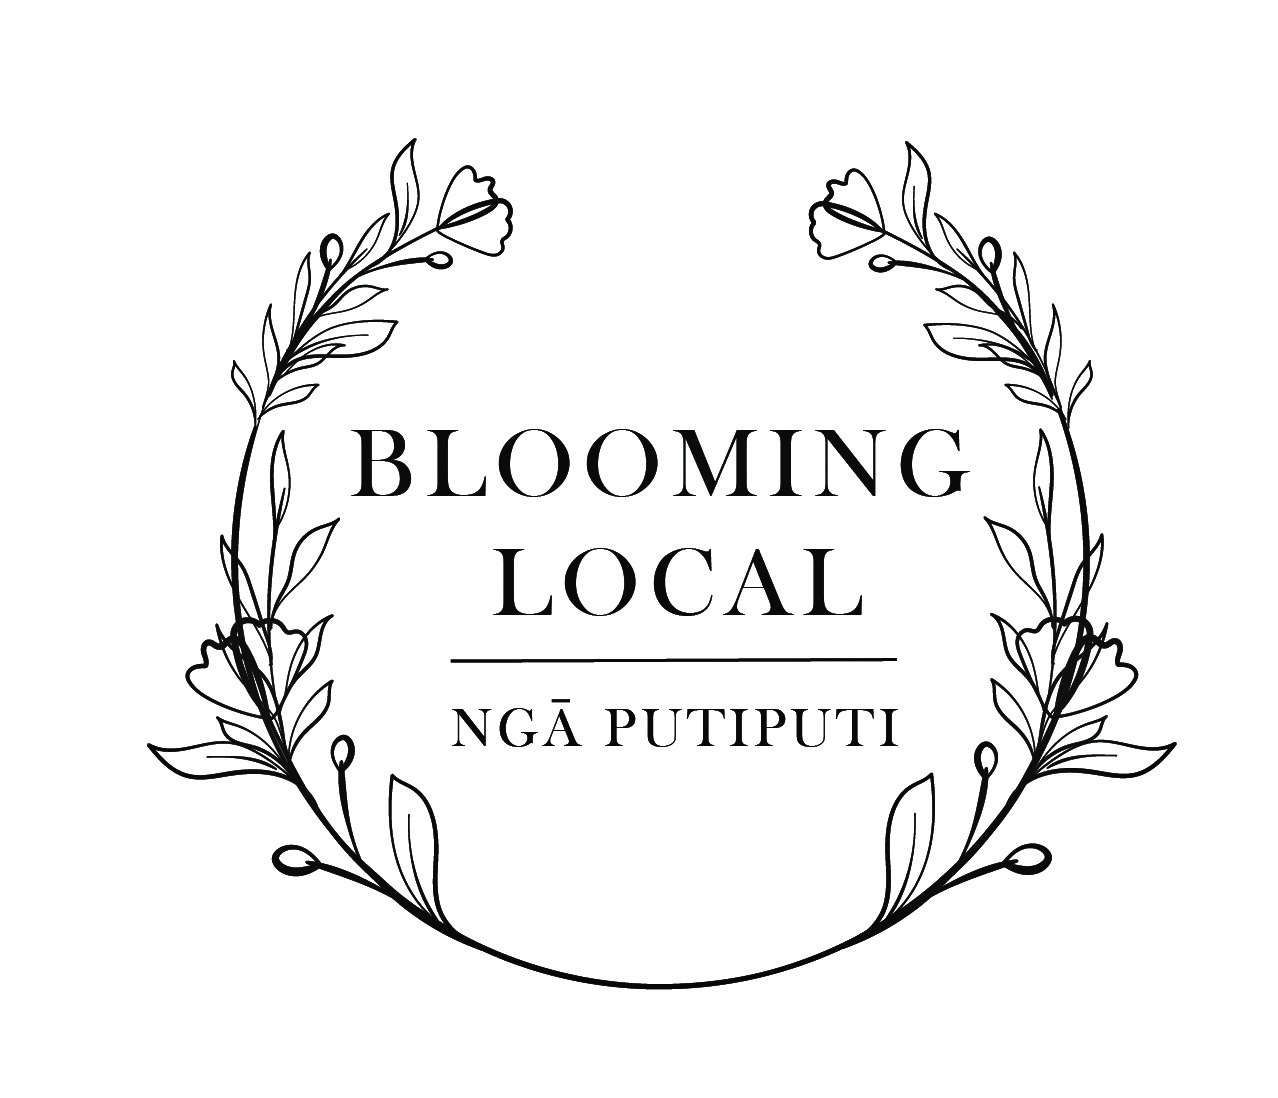 Blooming Local